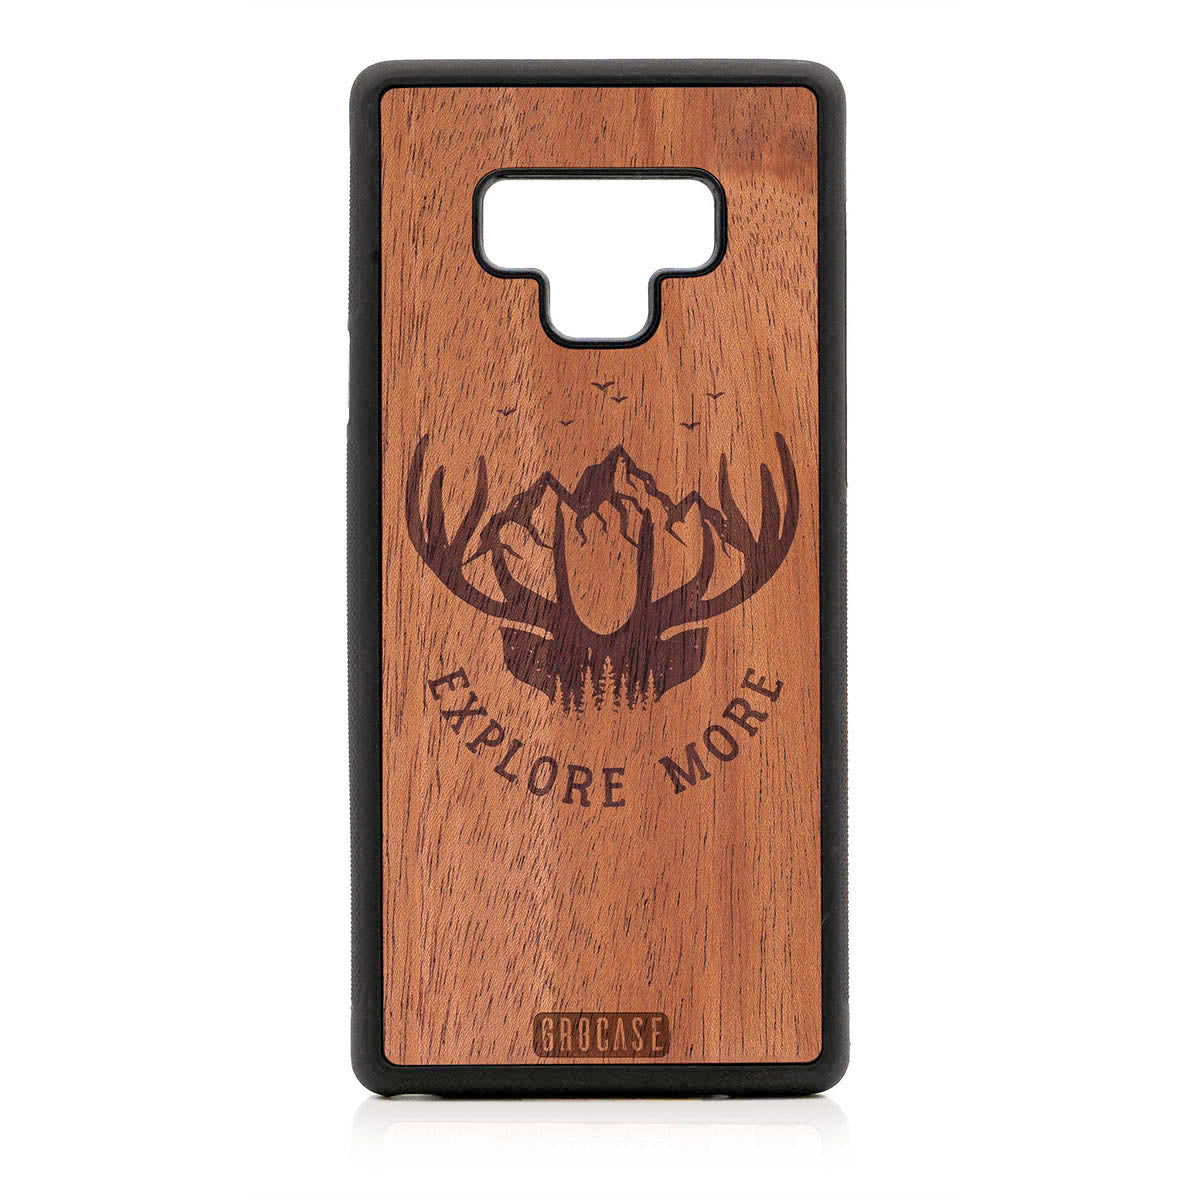 Explore More (Forest, Mountains & Antlers) Design Wood Case For Samsung Galaxy Note 9 by GR8CASE